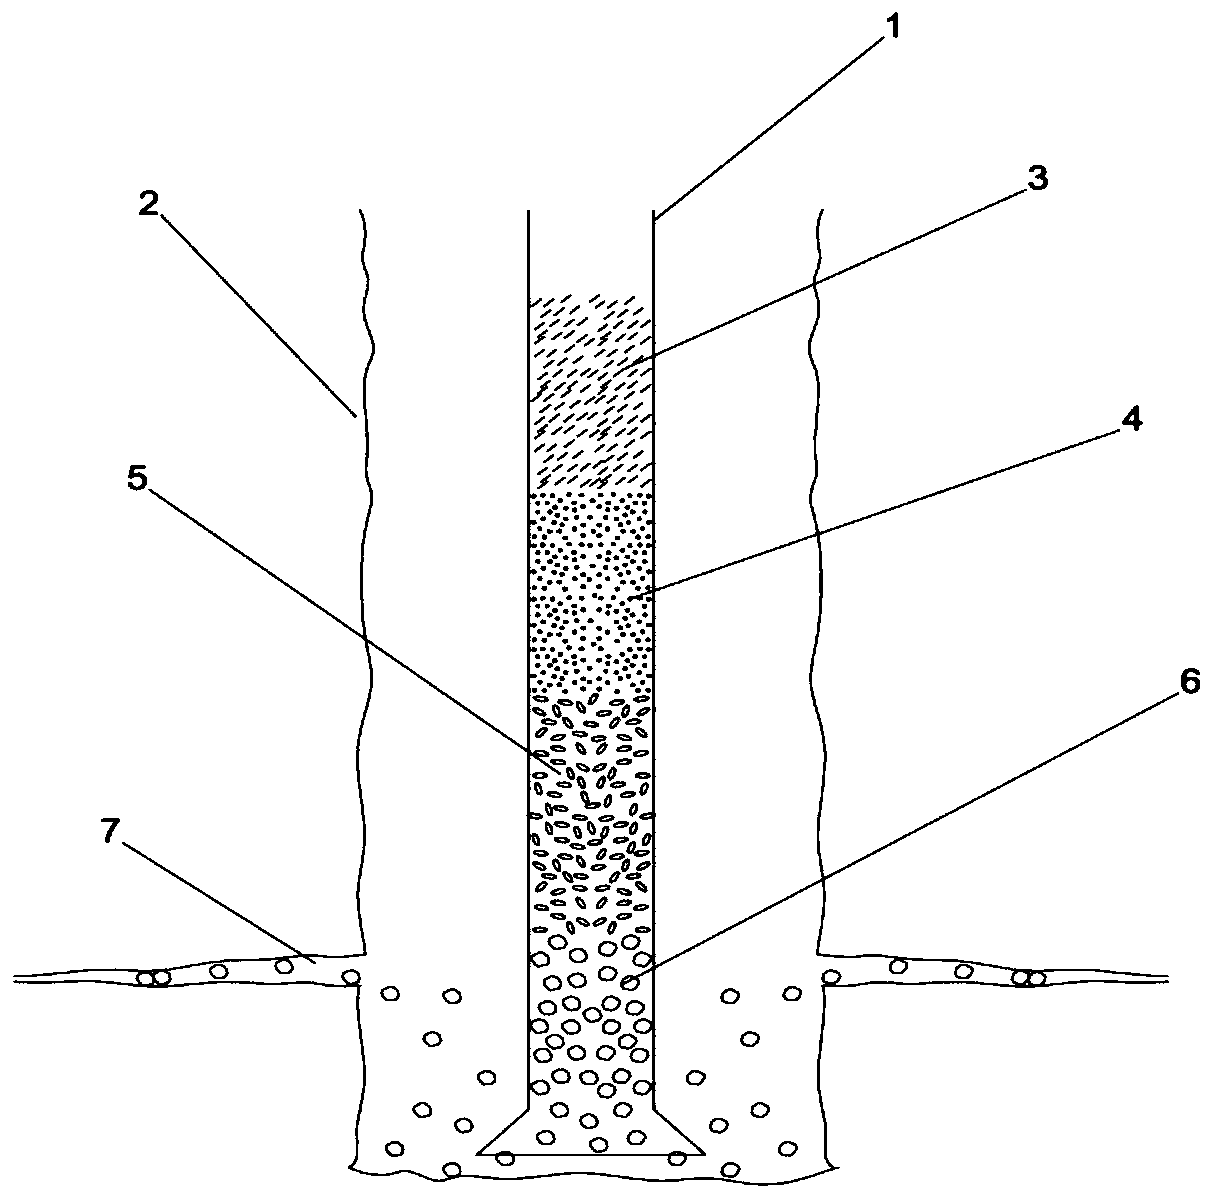 A multi-slug step-by-step plugging method suitable for fractured formations